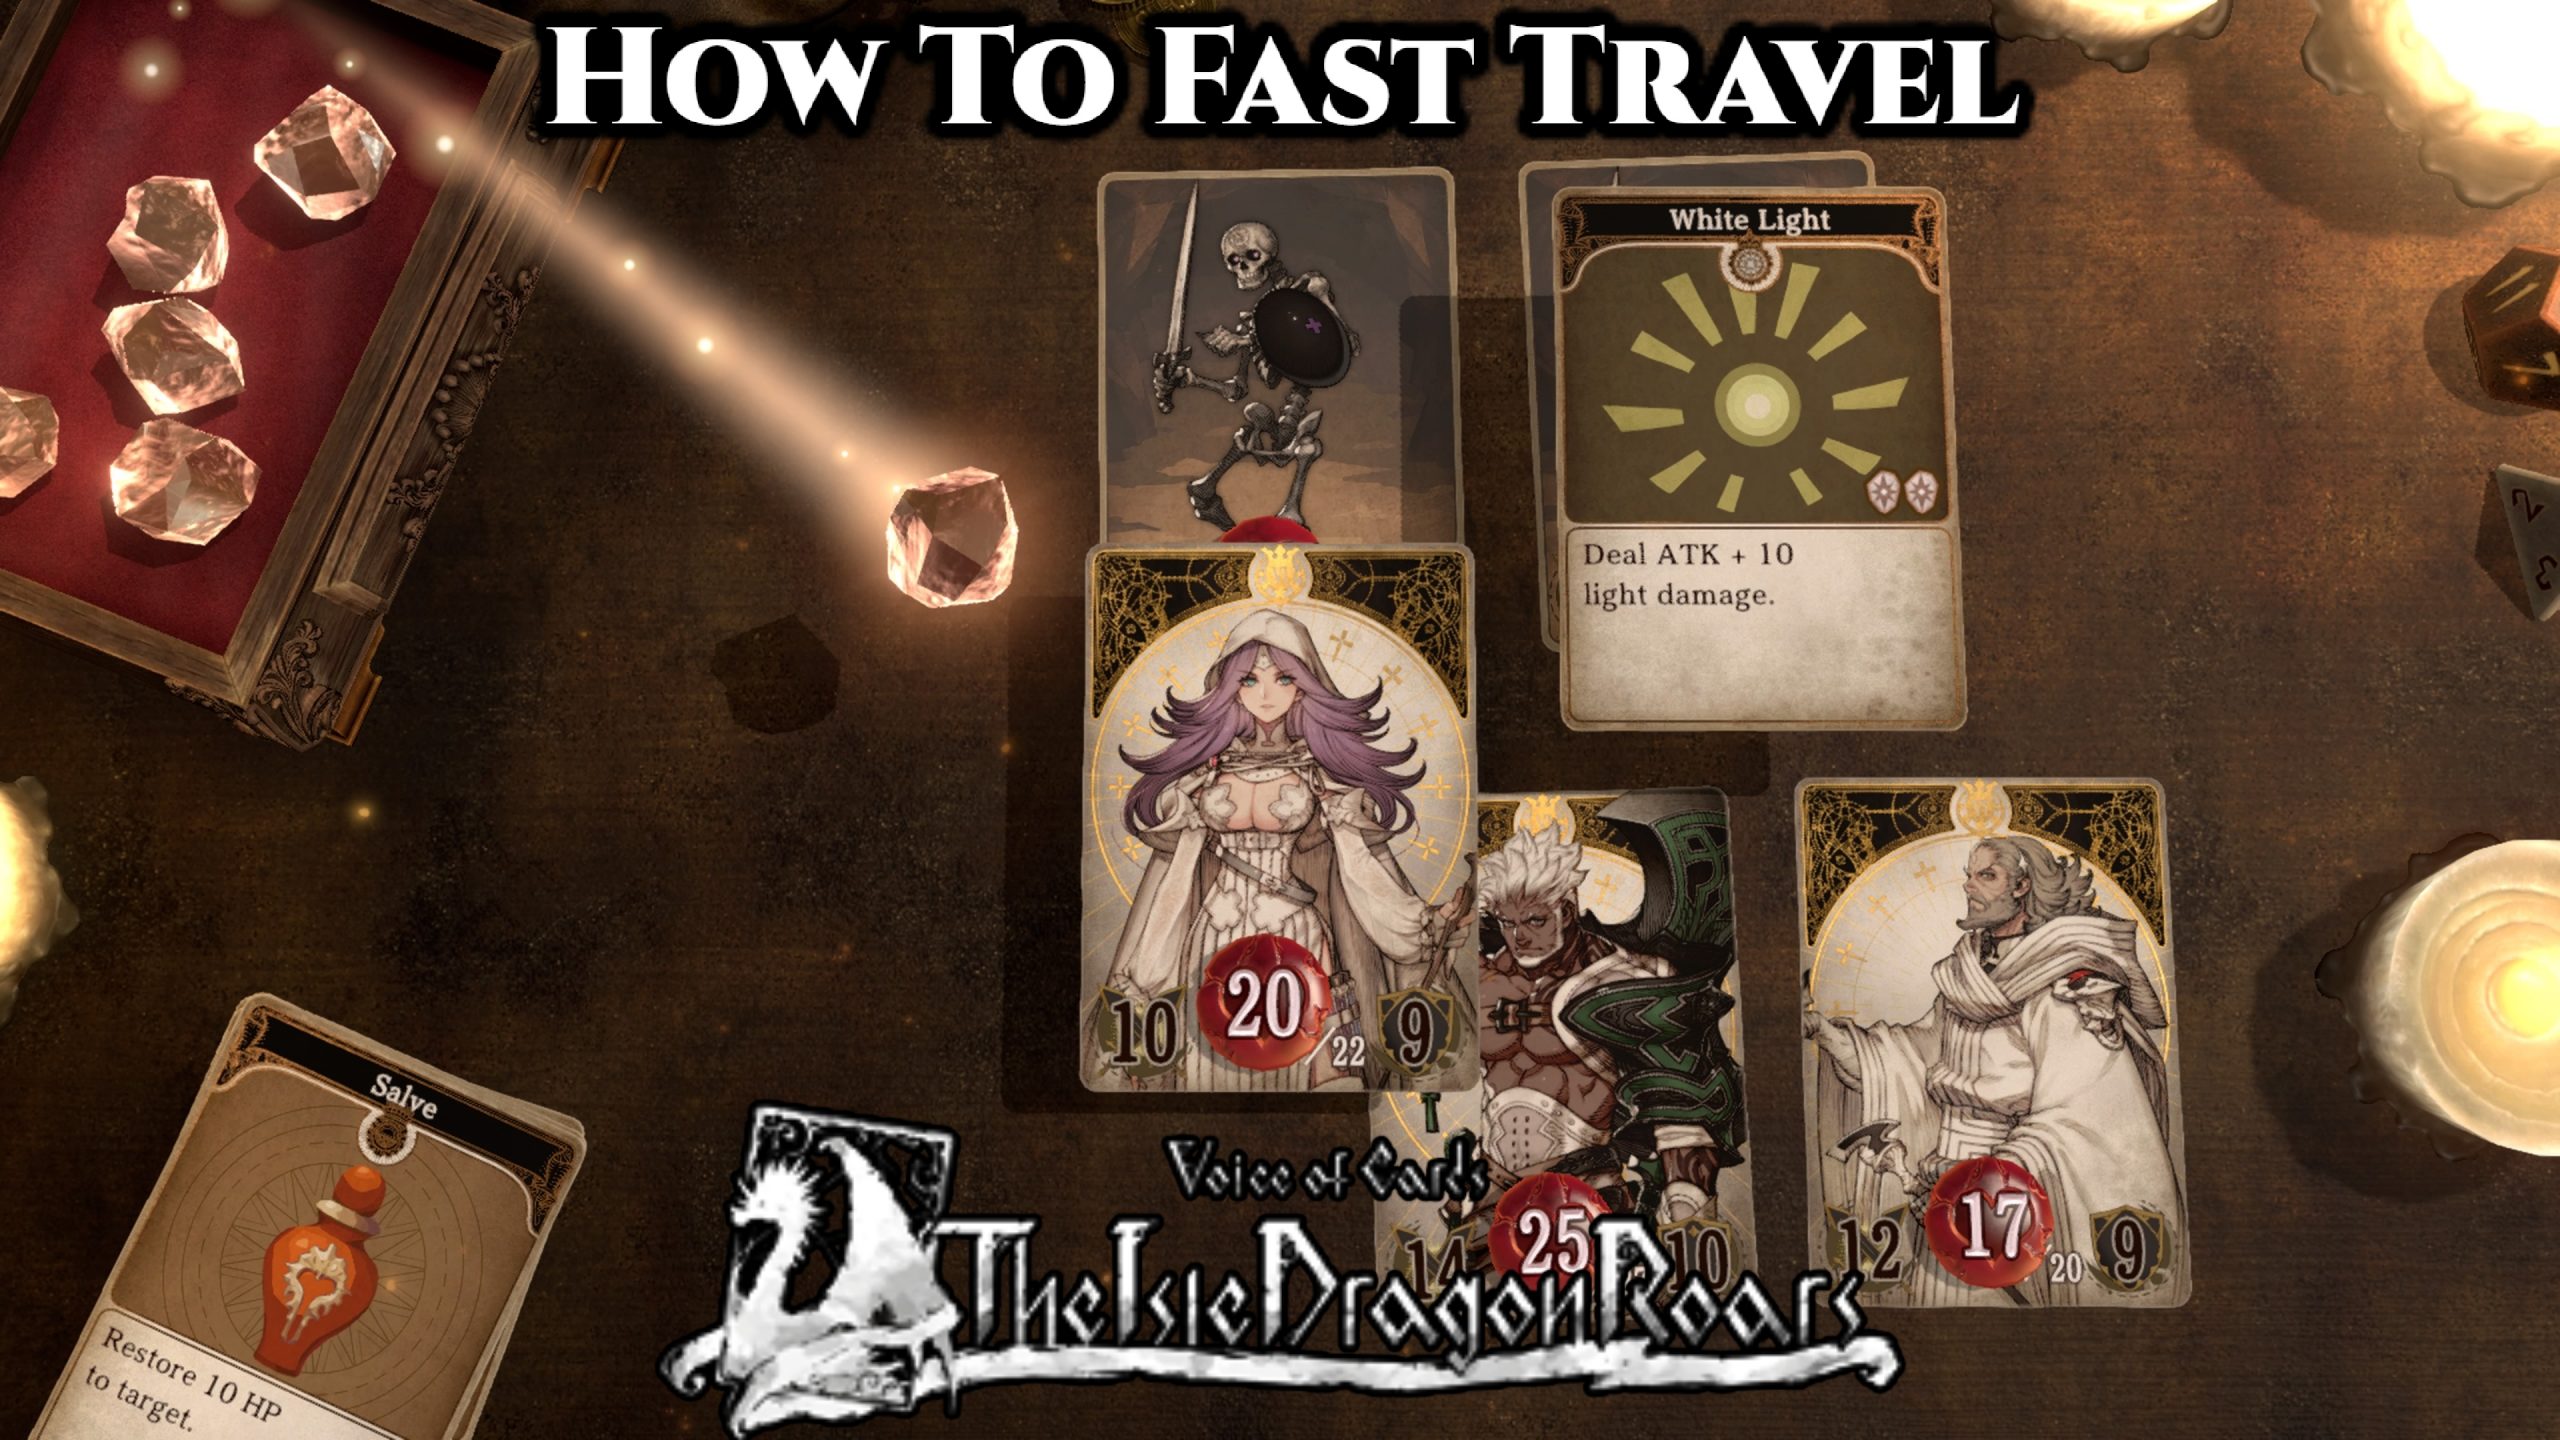 You are currently viewing How To Fast Travel In Voice of Cards: The Isle Dragon Roars